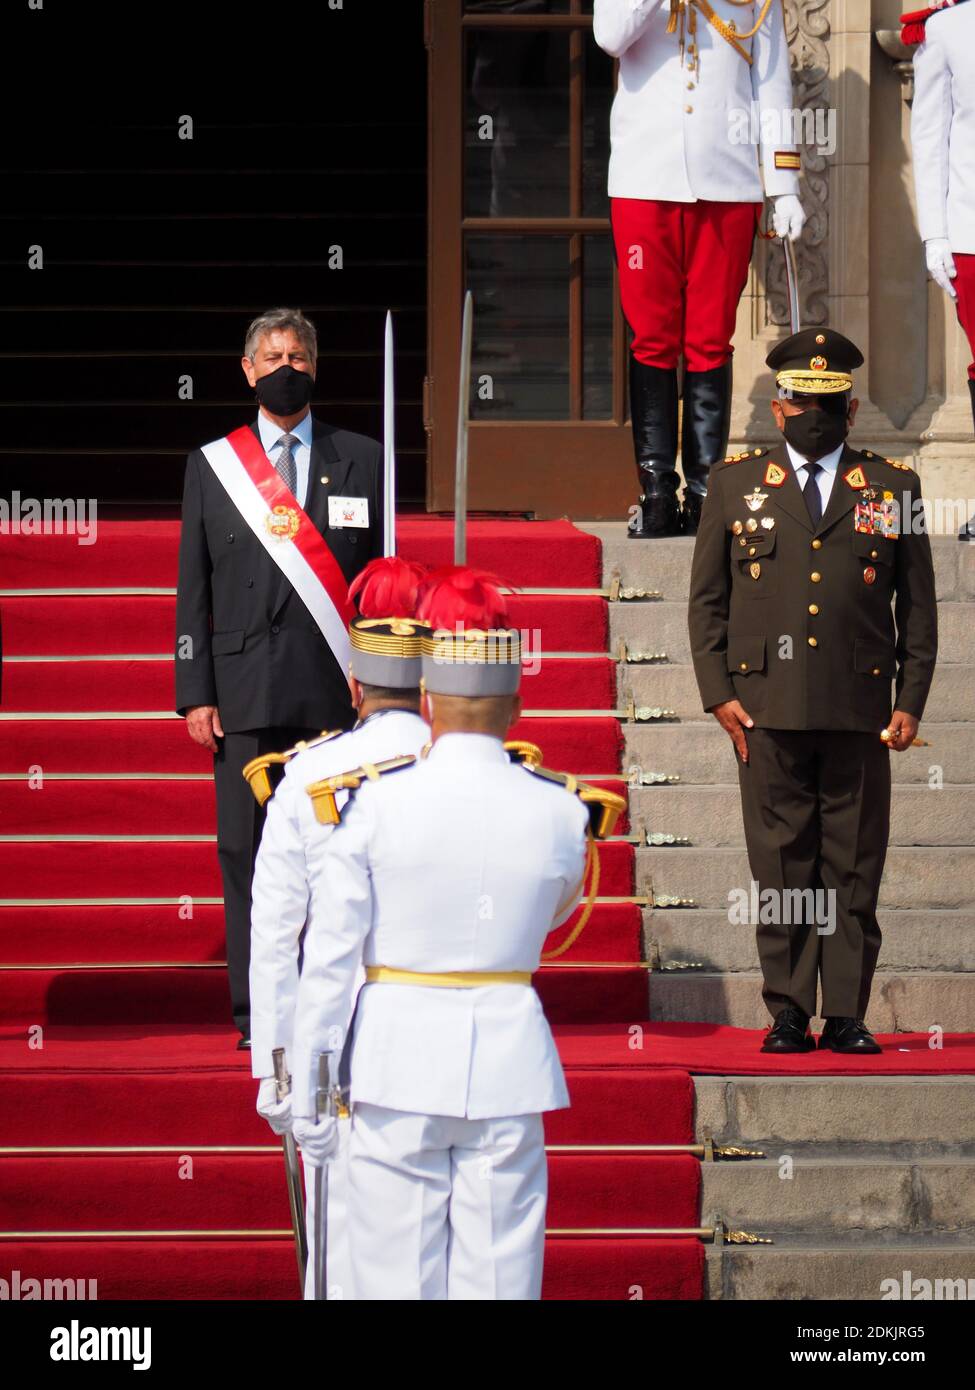 From left to right: Francisco Sagasti, President of Peru; General César Astudillo, Chief of the Joint Command of the Armed Forces. The  President leads the ceremony of awarding the Sword of Honour to the officers, recently graduated, who occupied the first position of their class in the training schools of the Armed Forces. Stock Photo